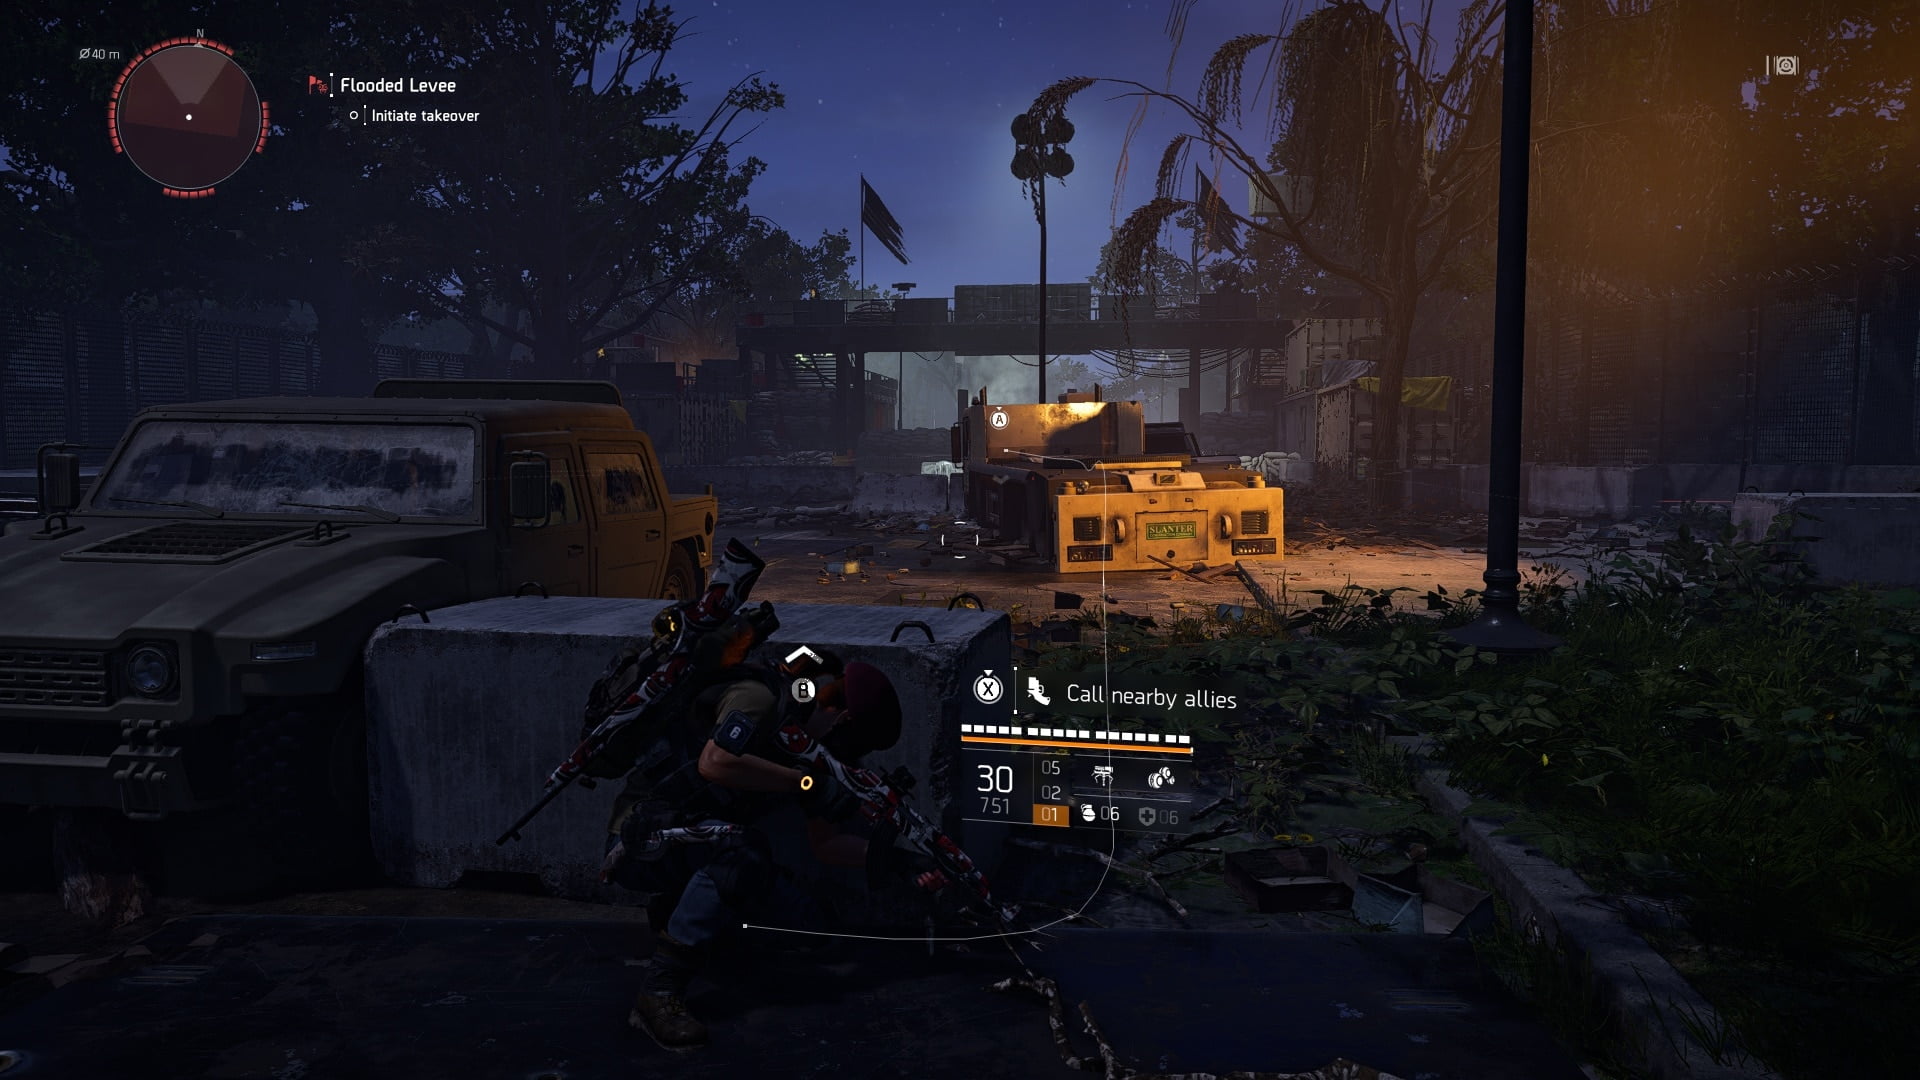 TheDivision2 5 12 2019 9 30 52 AM 188